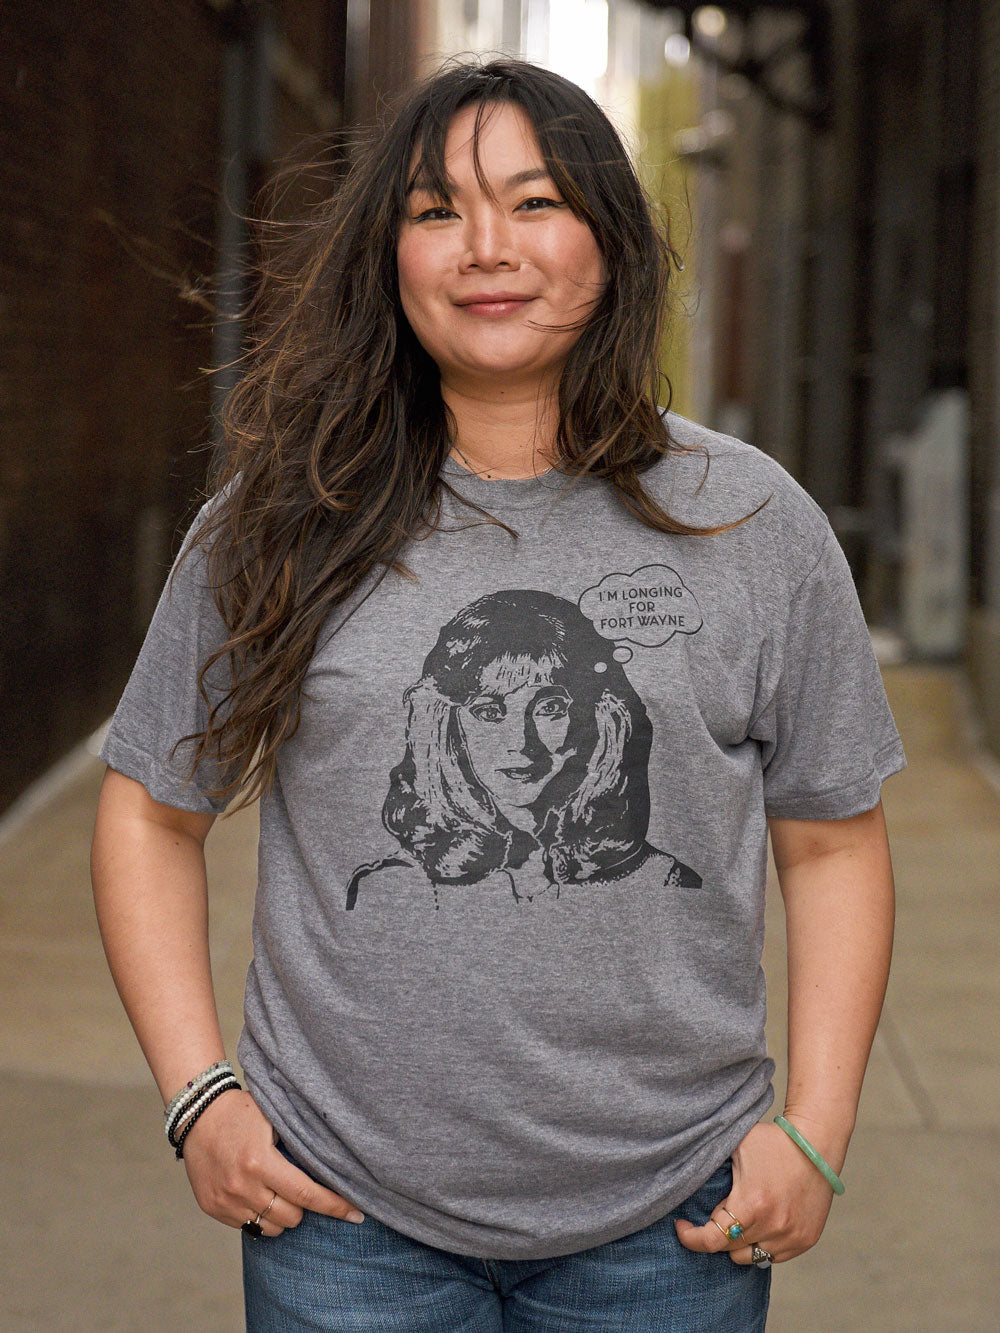 I'm Longing for Fort Wayne (Shelley Long) gray heather t-shirt on model in alley